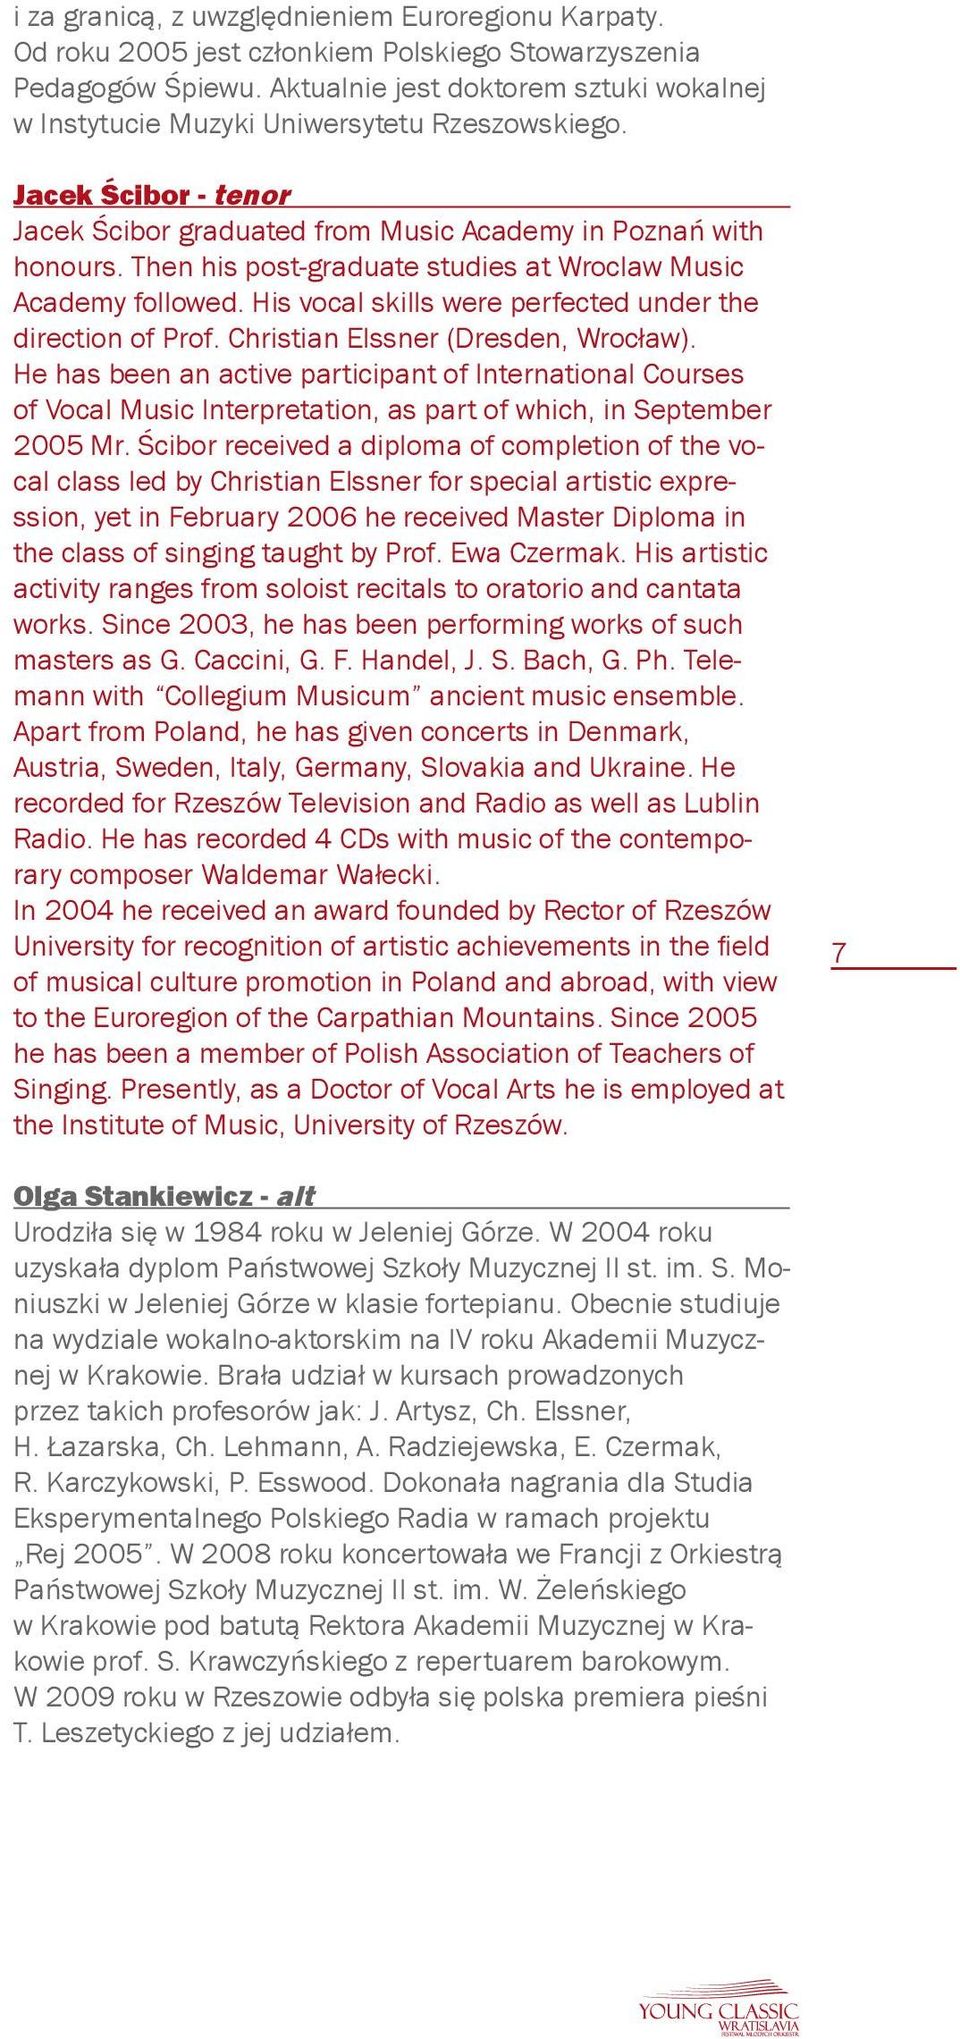 Then his post-graduate studies at Wroclaw Music Academy followed. His vocal skills were perfected under the direction of Prof. Christian Elssner (Dresden, Wrocław).